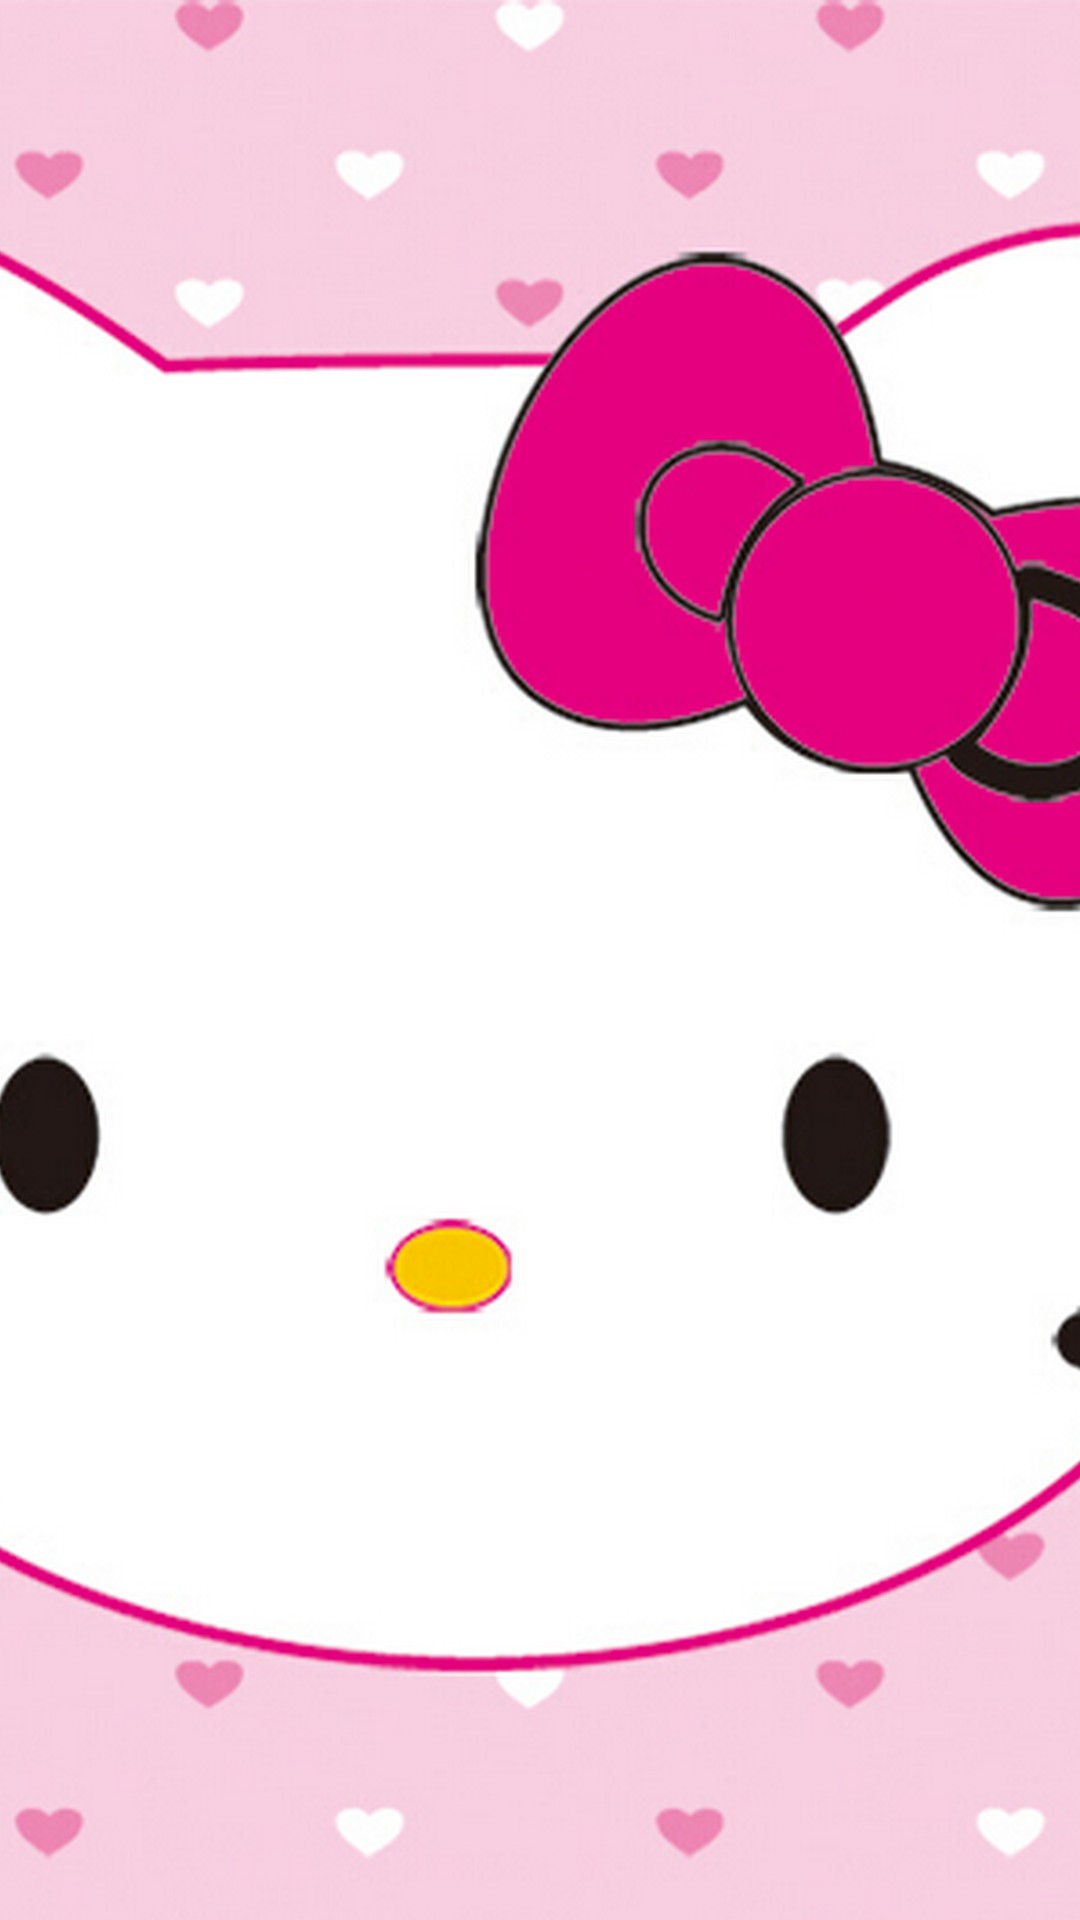 Wallpaper Hello Kitty Characters Android with image resolution 1080x1920 pixel. You can make this wallpaper for your Android backgrounds, Tablet, Smartphones Screensavers and Mobile Phone Lock Screen